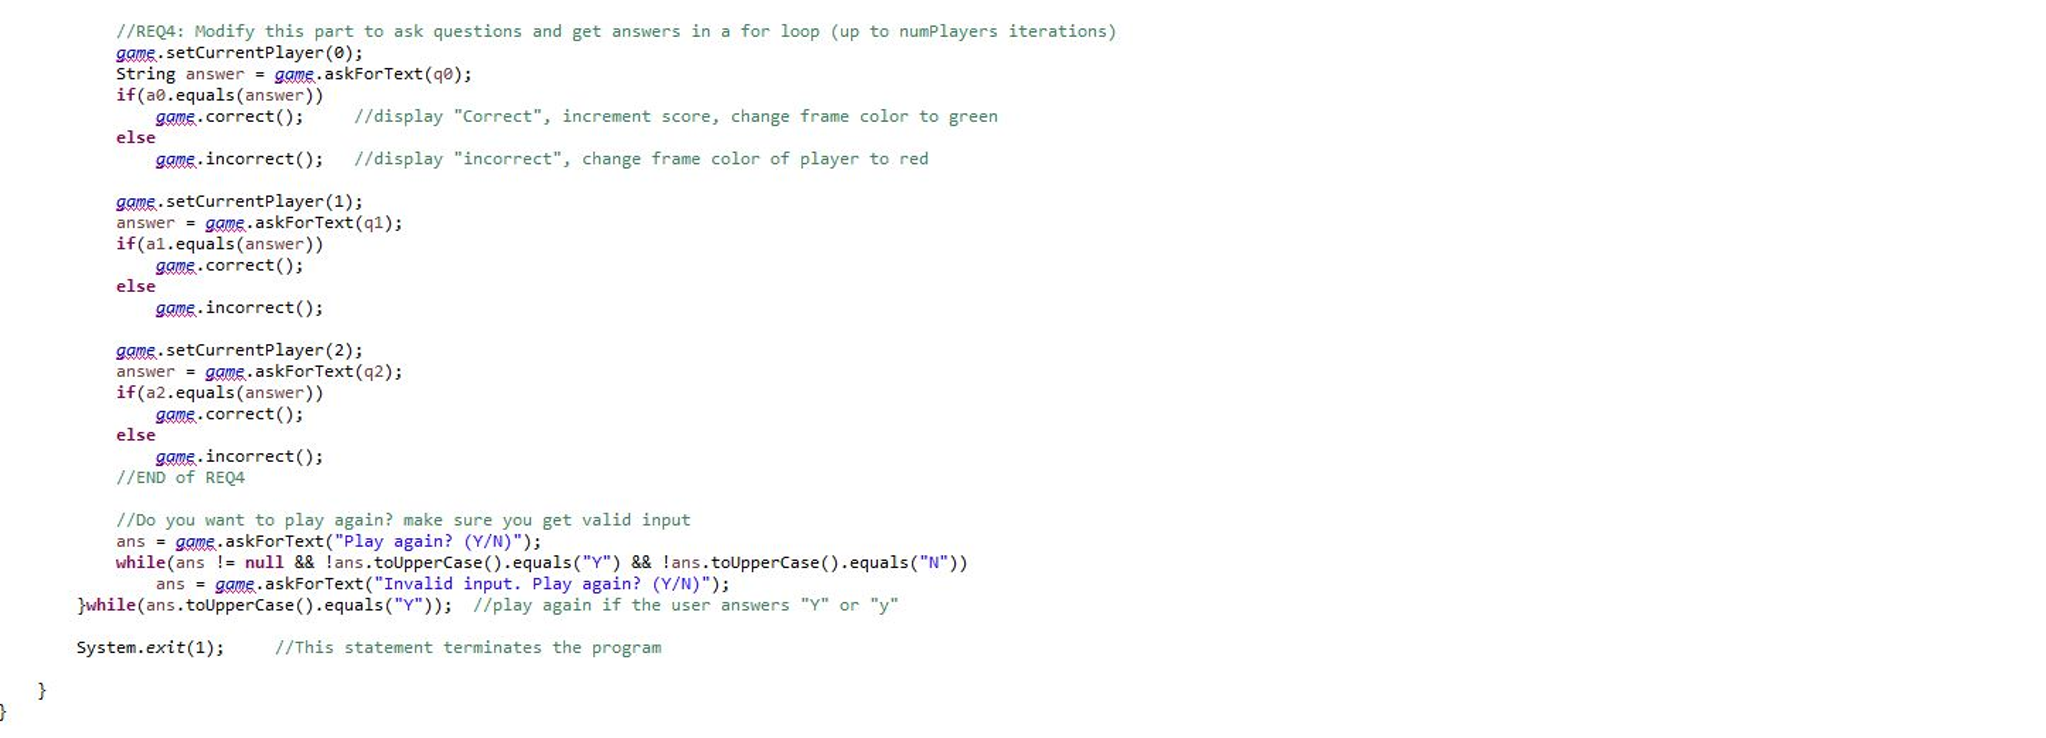 Solved Part 2: This part is a game that the user can play.